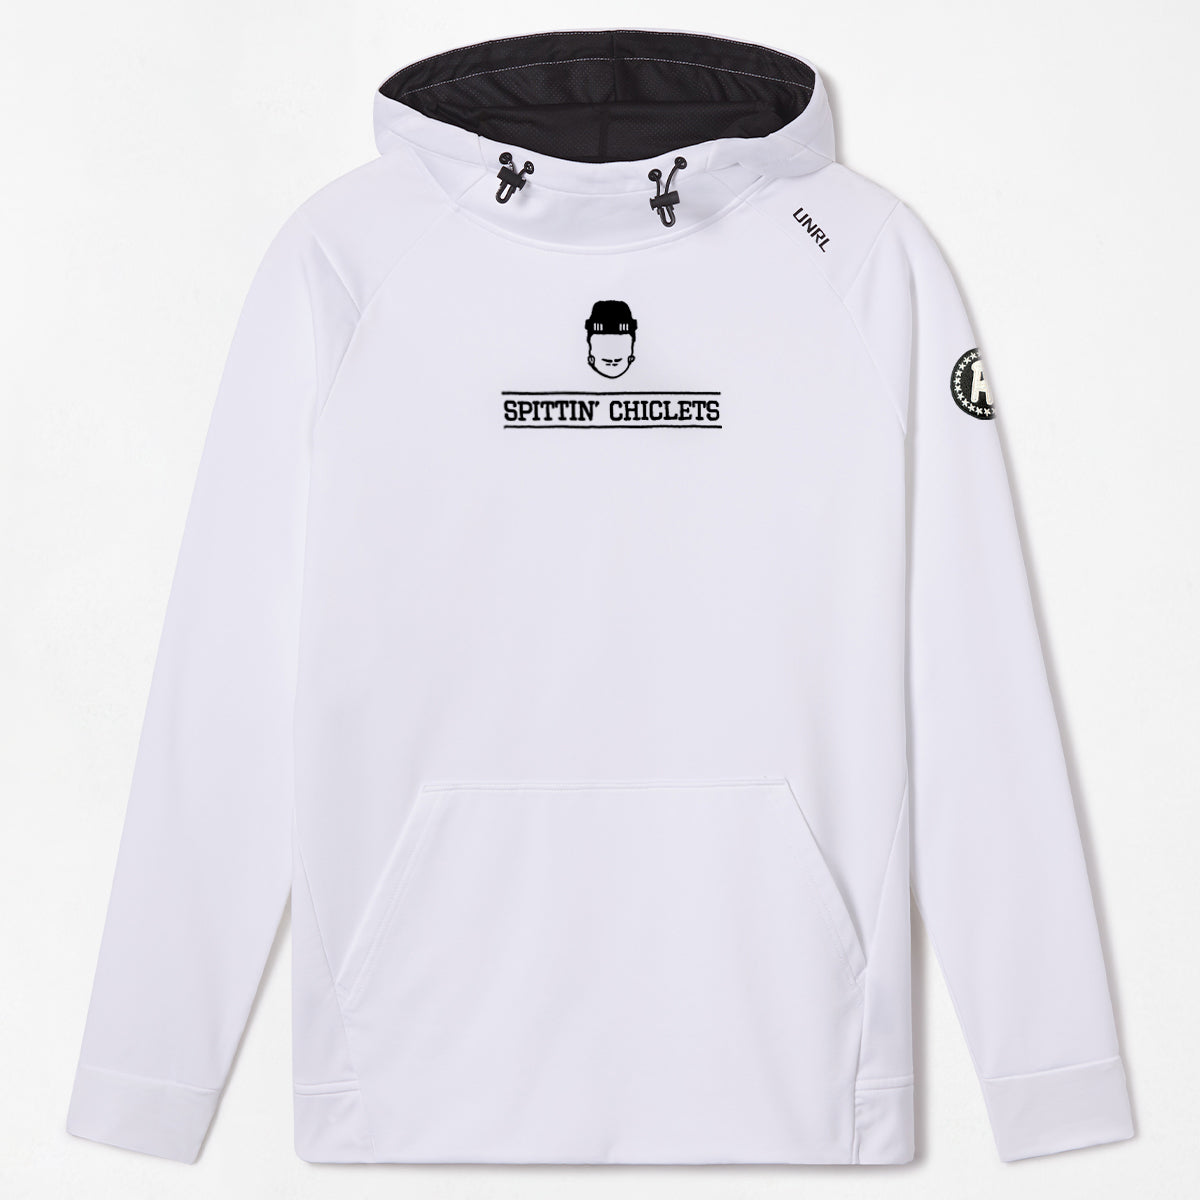 UNRL x Spittin Chiclets Crossover Hoodie II-Hoodies-Spittin Chiclets-Barstool Sports